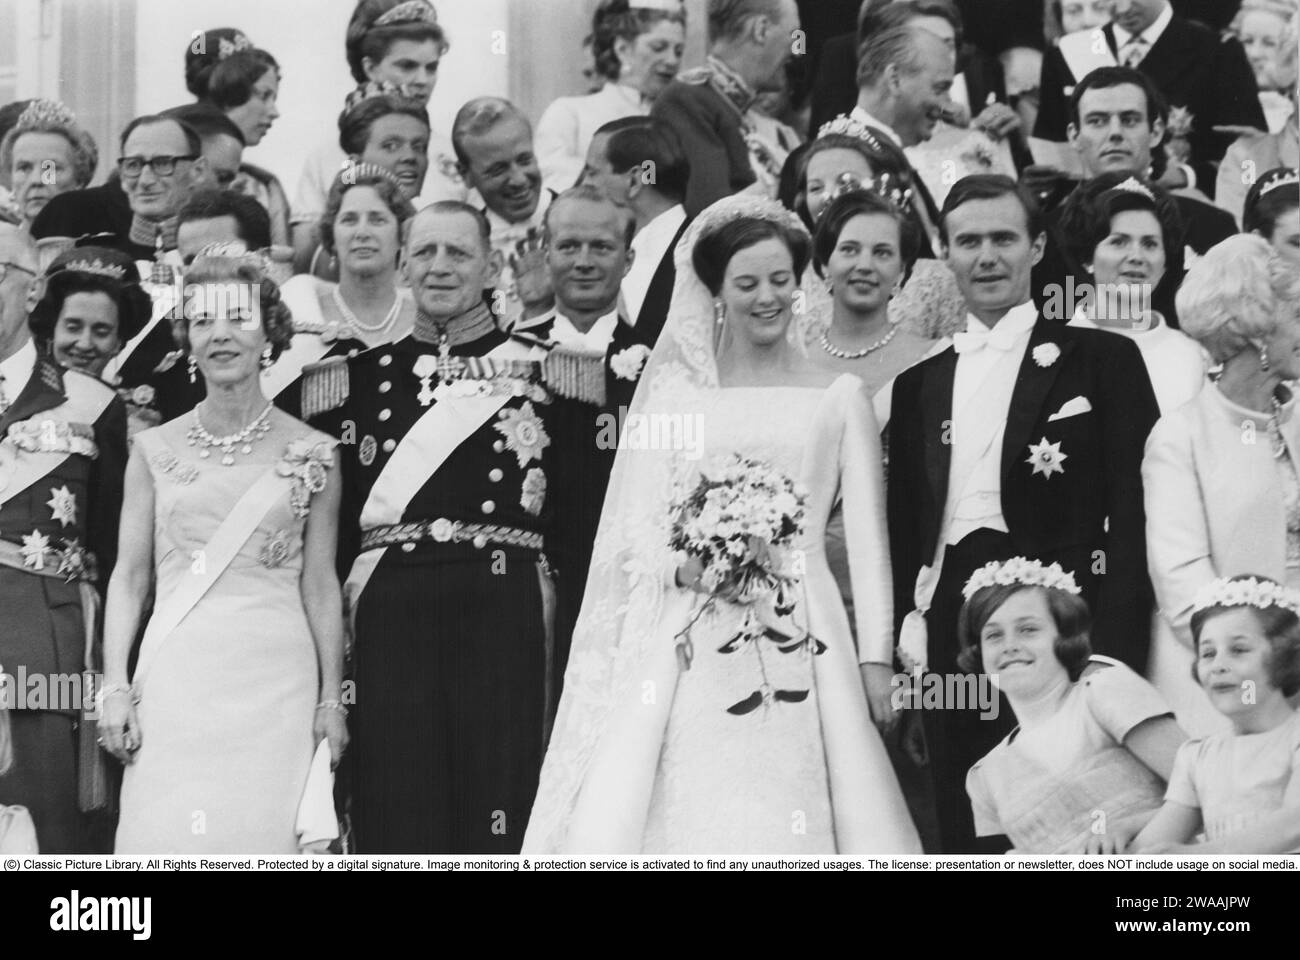 Margrethe II of Denmark. The wedding on 10 June 1967 between the then Crown Princess Margrethe and Prince Henrik. On the far left, King Gustaf VI Adolf of Sweden with sister Queen Ingrid and her husband King Frederick IX of Denmark. Behind the bride and groom can be seen Margrethe's sister Princess Bendikte and Richard of Sayn-Wittgenstein-Berleburg. At this time Margrethe was crownprincess and heir to the throne, she became Queen of Denmark 15 january 1972. Stock Photo